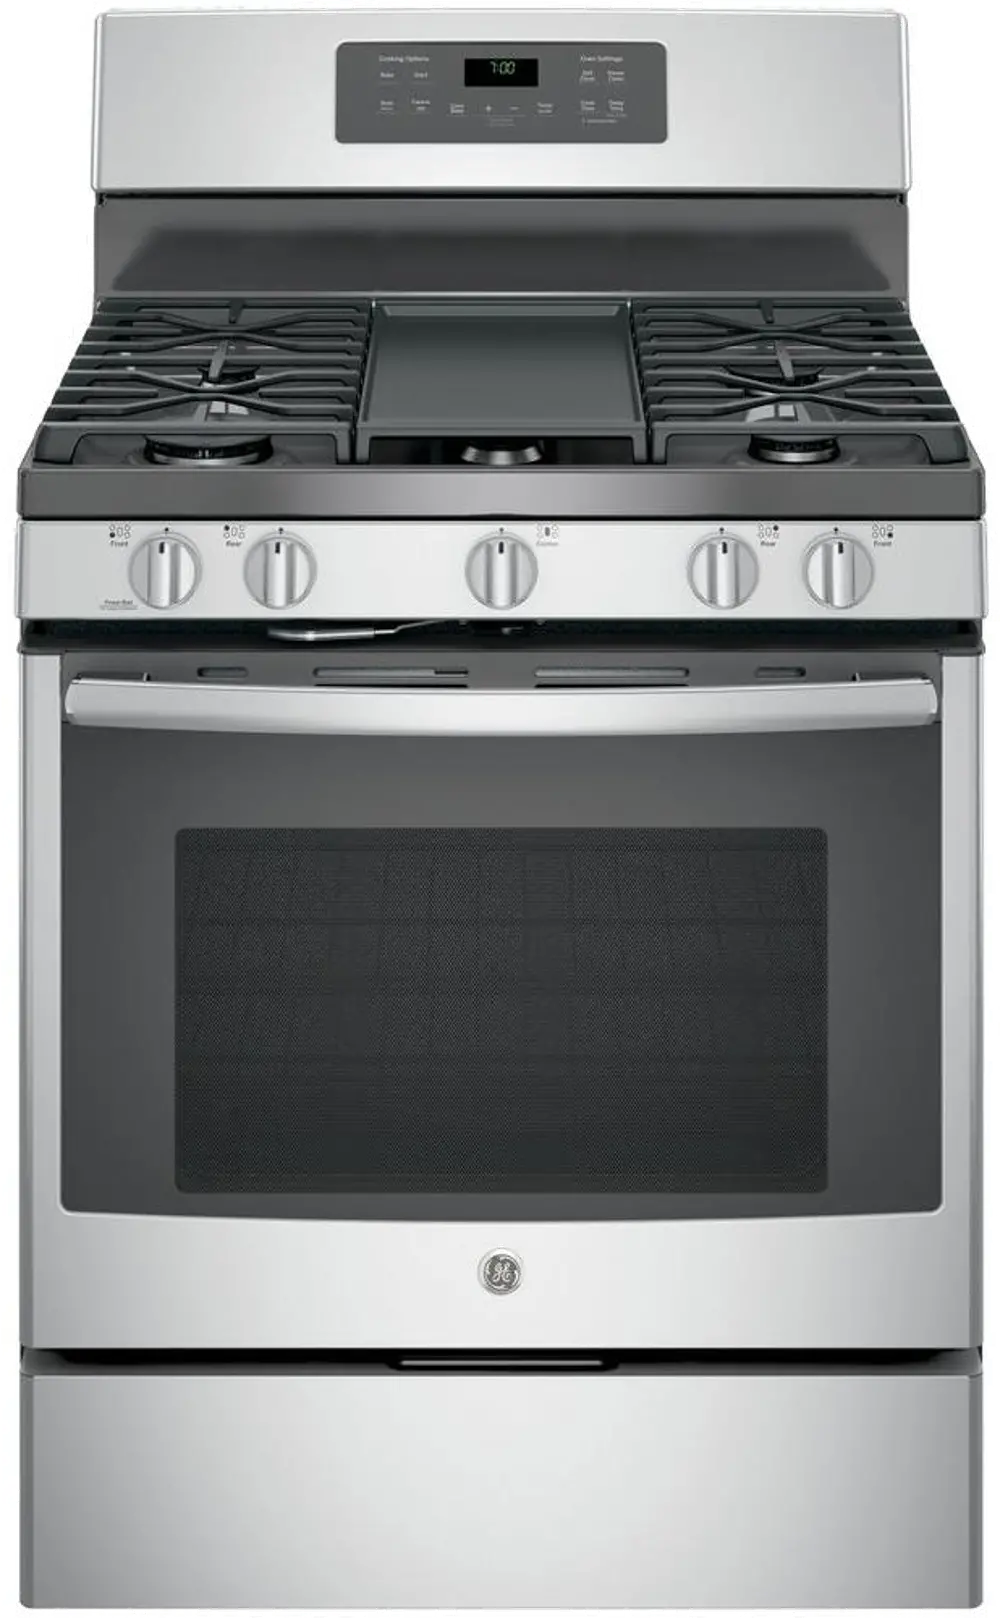 JGB700SEJSS GE 5.0 cu. ft. Gas Range with Non-stick Griddle - Stainless Steel-1